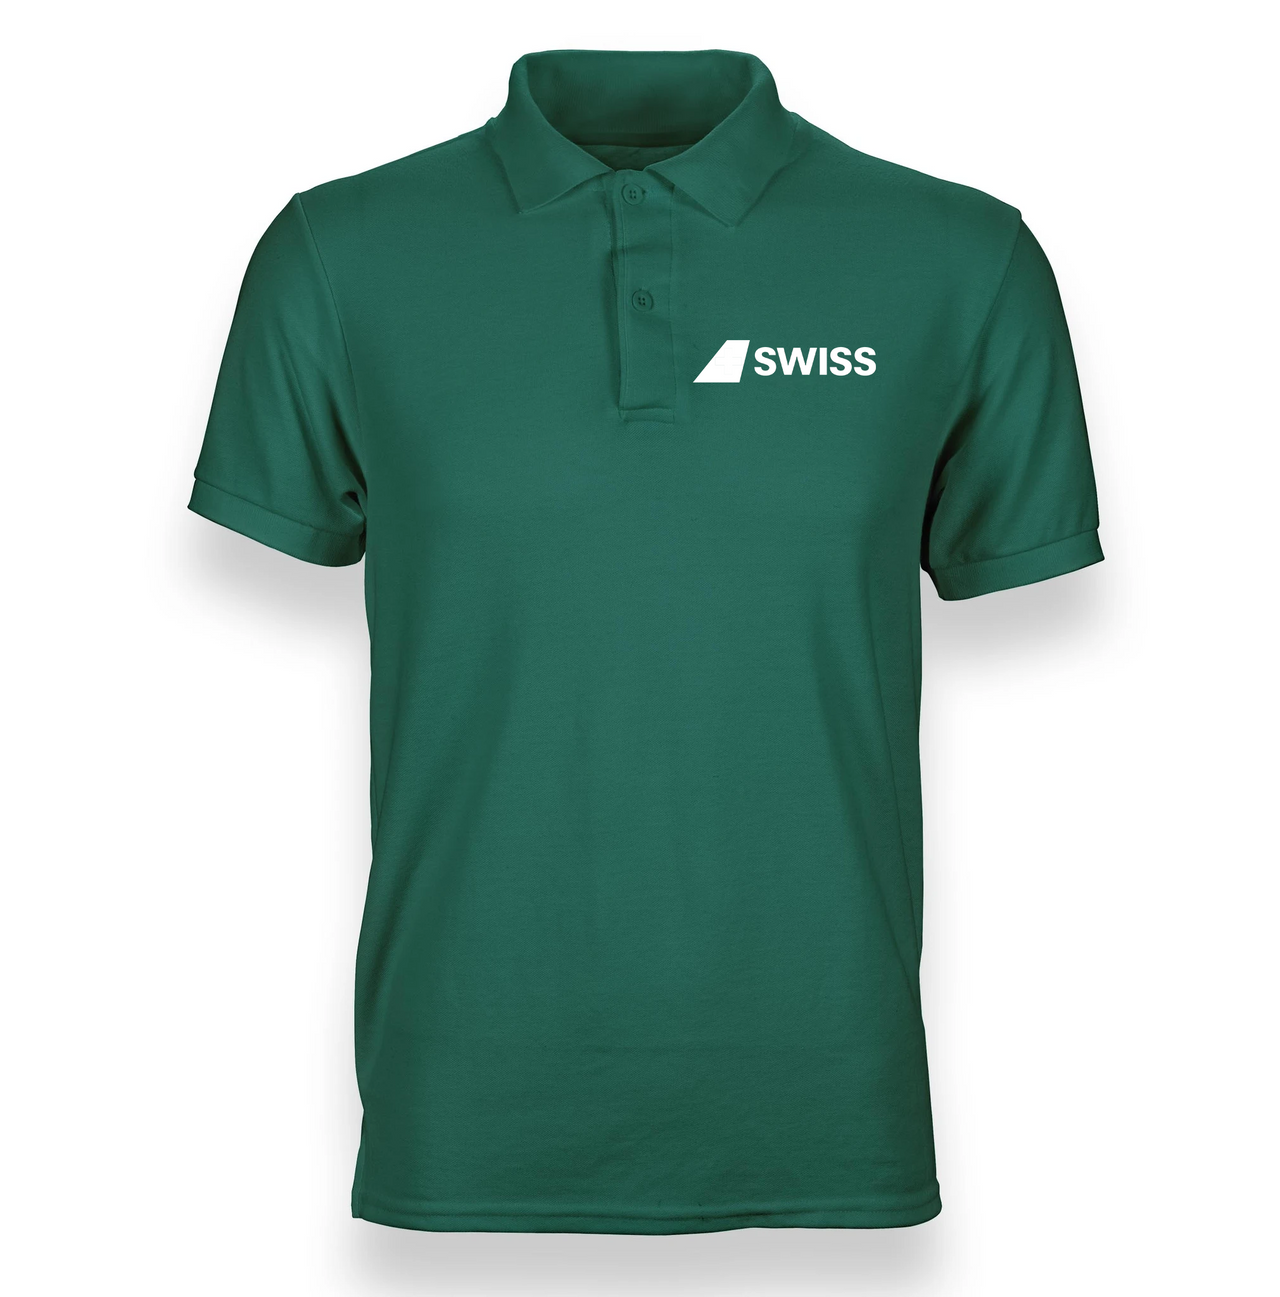 SWISS AIRLINES POLO T-SHIRT